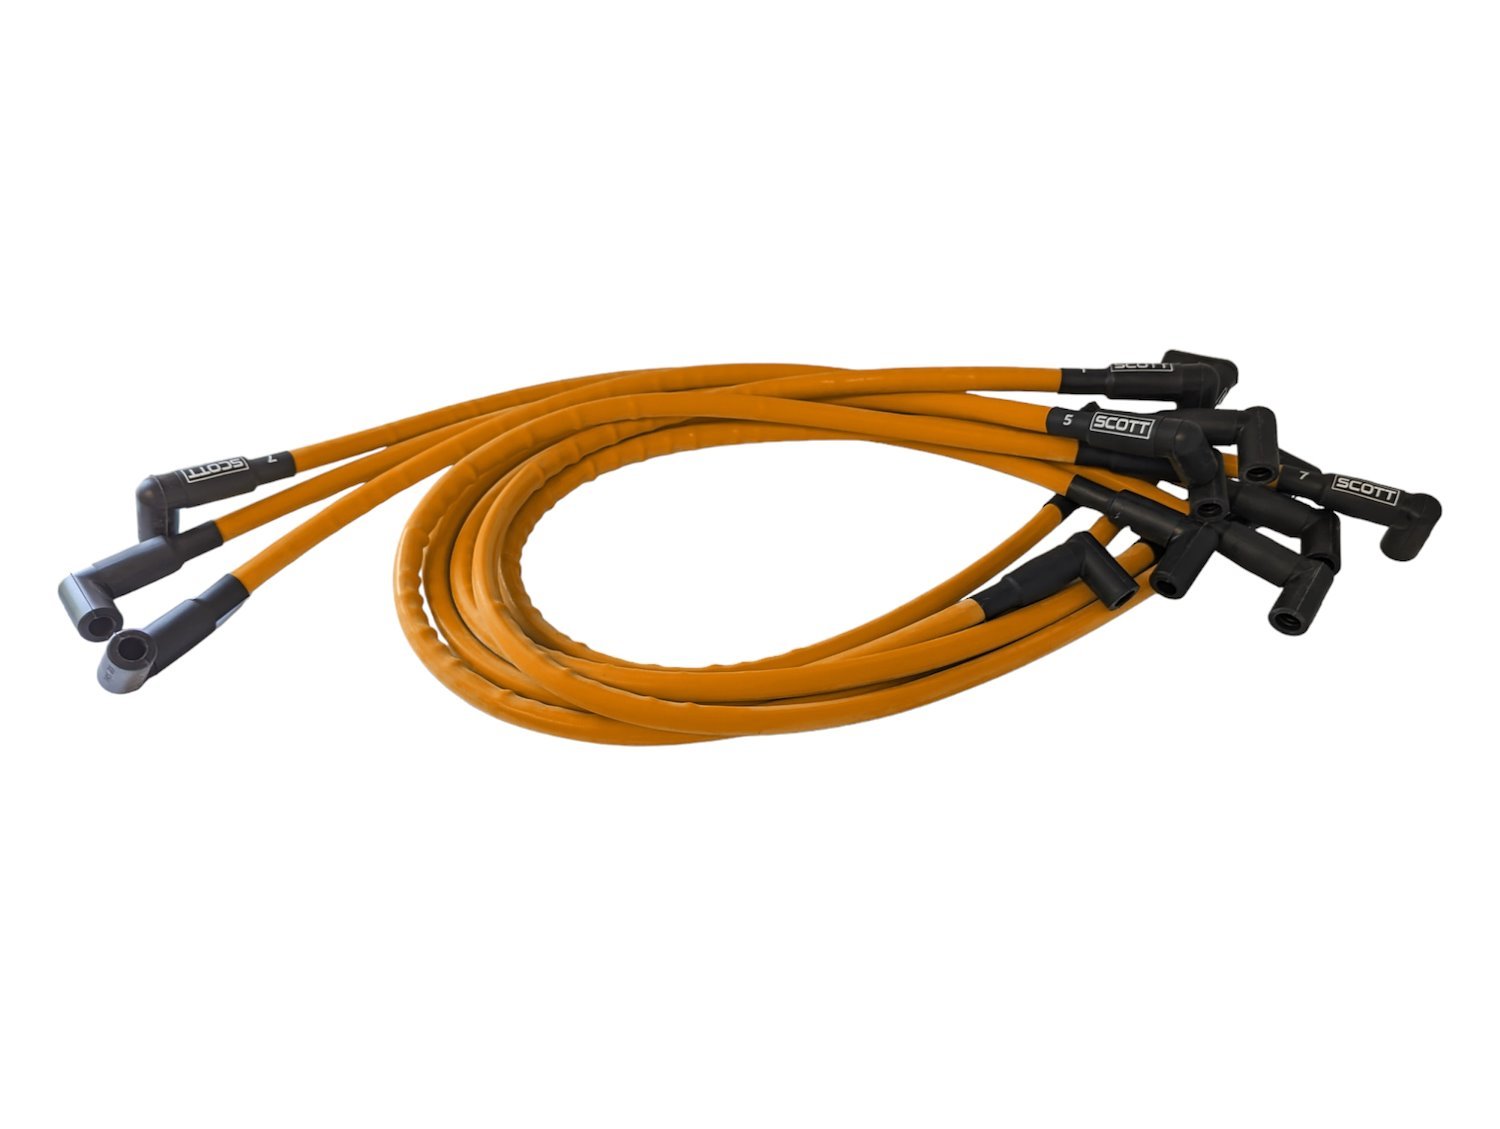 SPW-CH-407-5 High-Performance Silicone-Sleeved Spark Plug Wire Set for Small Block Chevy, Under Header [Orange]